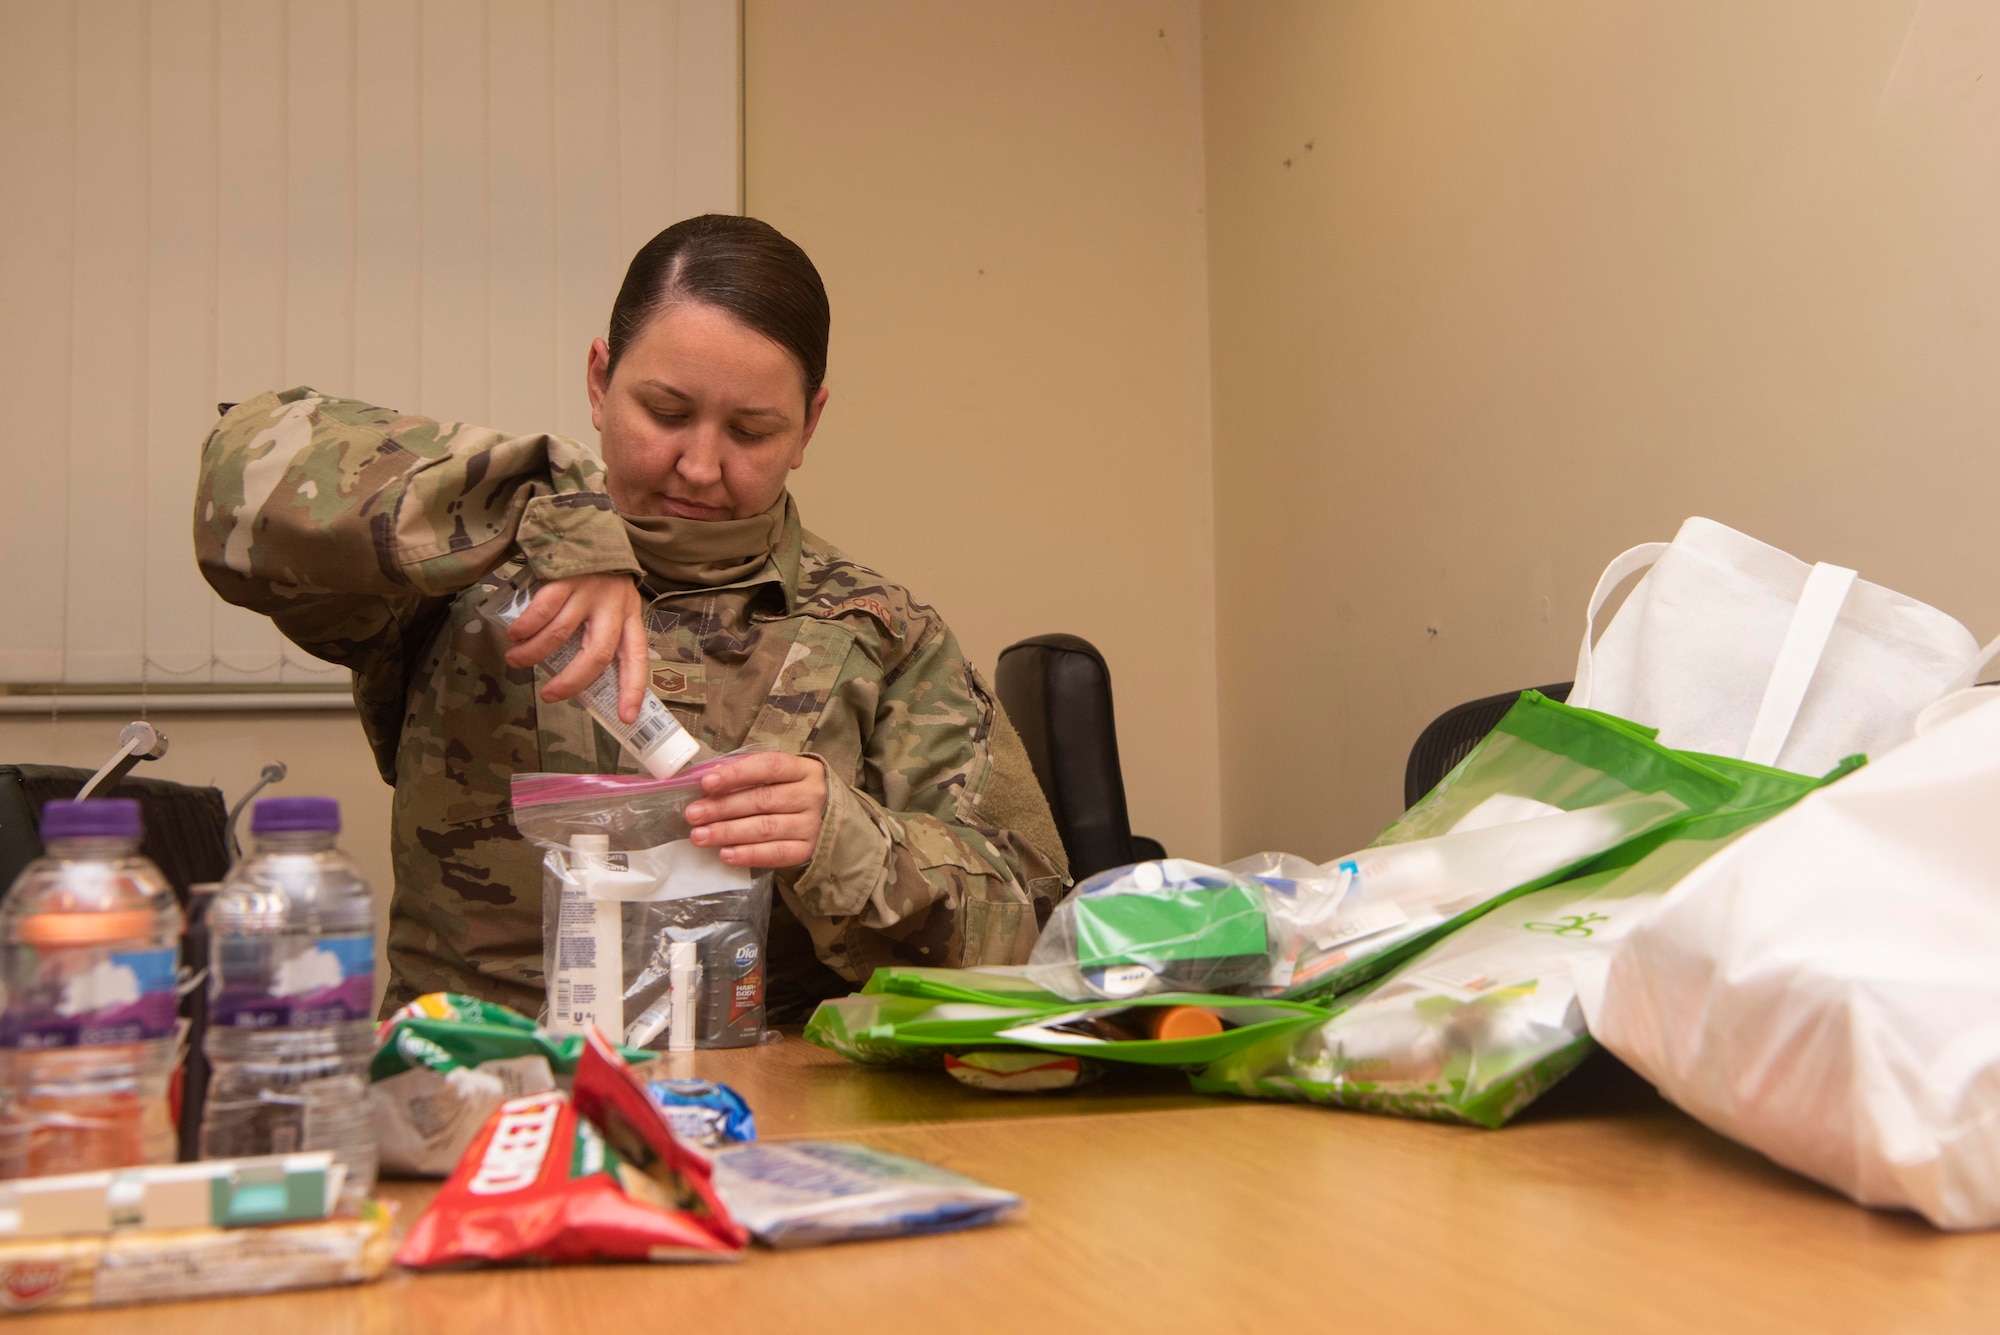 Master Sgt. Aisling Loftus, 100th Force Support Squadron postal superintendent, assembles a care package of hygiene items at RAF Mildenhall, England, June 15, 2020. Loftus spearheaded an initiative led by the Top-3 committee to collect hygiene items, snacks, and money for local healthcare workers. (U.S. Air Force photo by Airman 1st Class Joseph Barron)